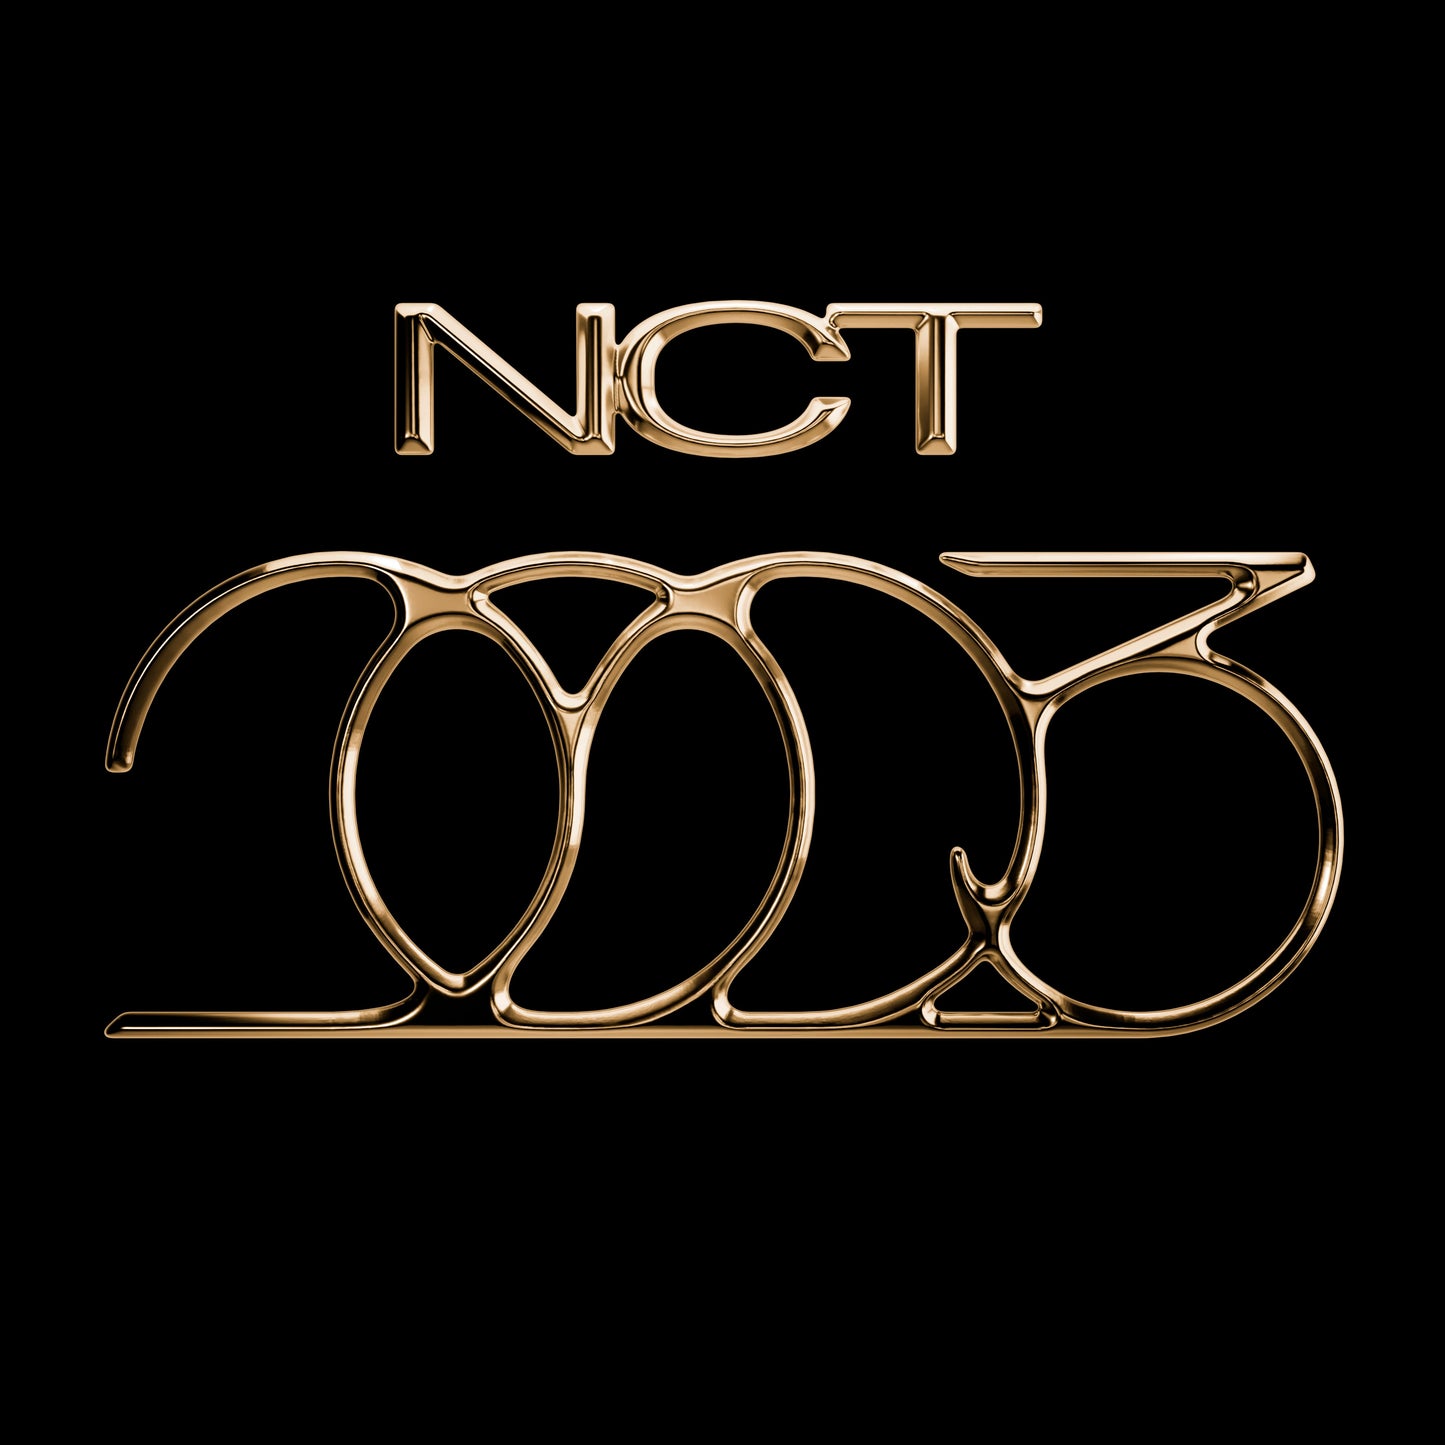 NCT 4TH ALBUM 'GOLDEN AGE' (ARCHIVING) COVER